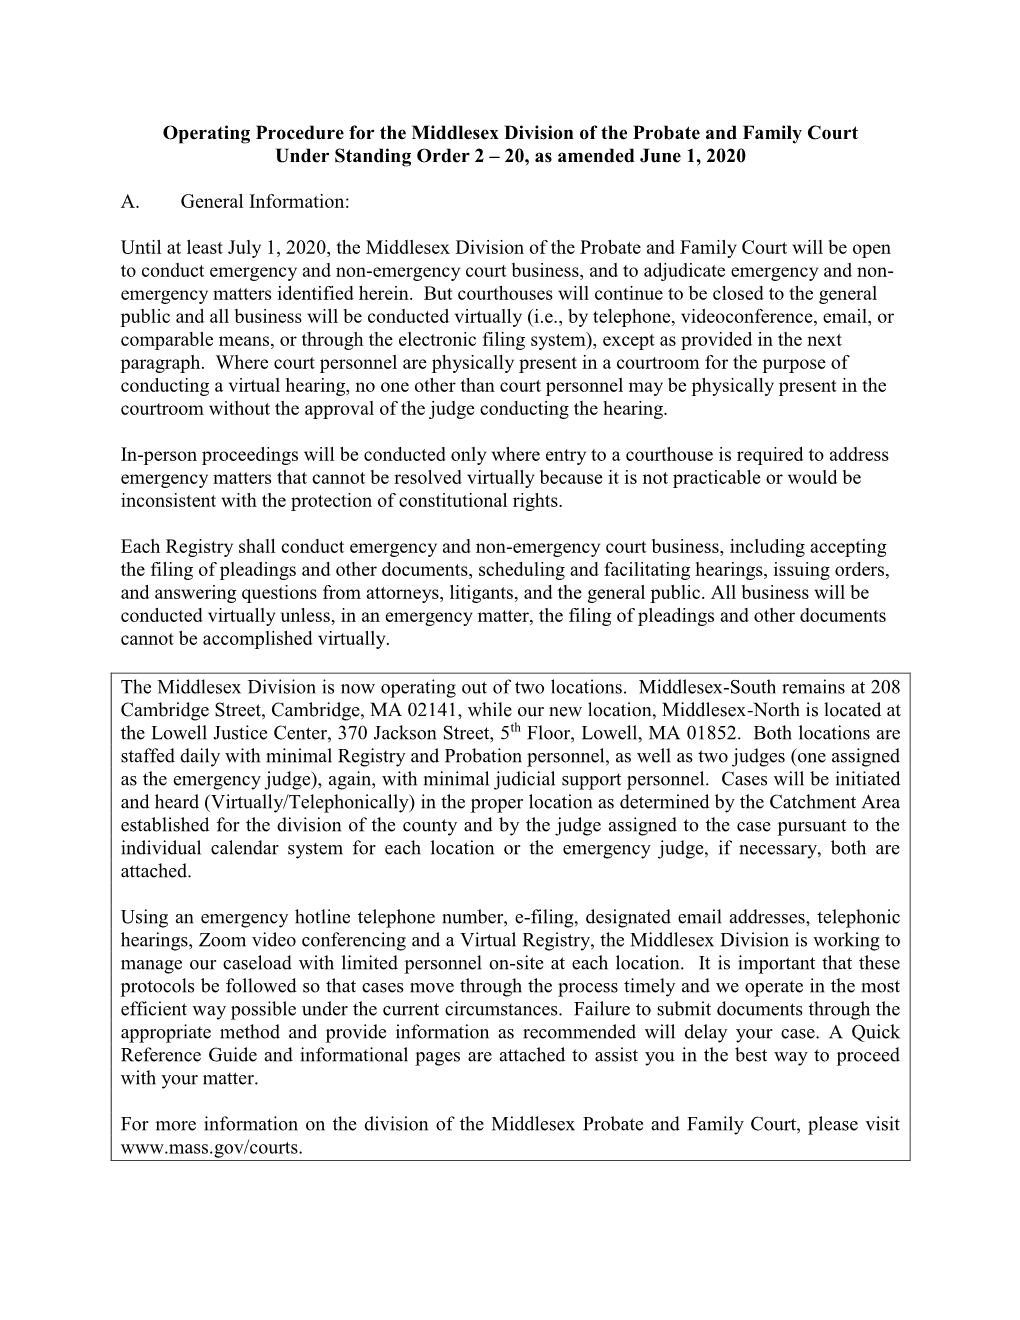 Operating Procedure for the Middlesex Division of the Probate and Family Court Under Standing Order 2 – 20, As Amended June 1, 2020